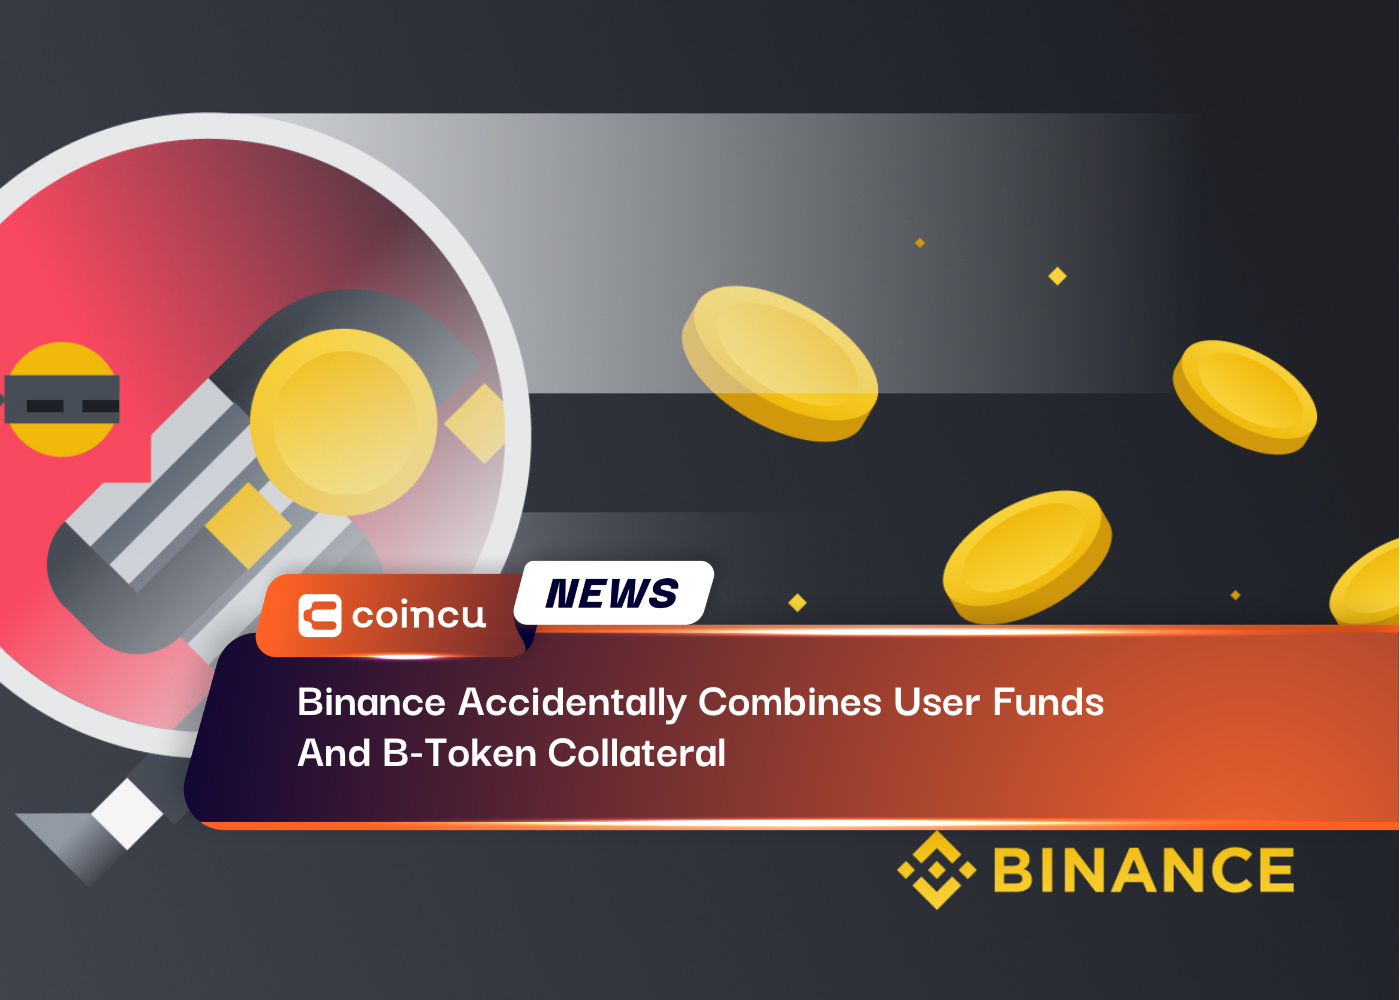 Binance Accidentally Combines User Funds